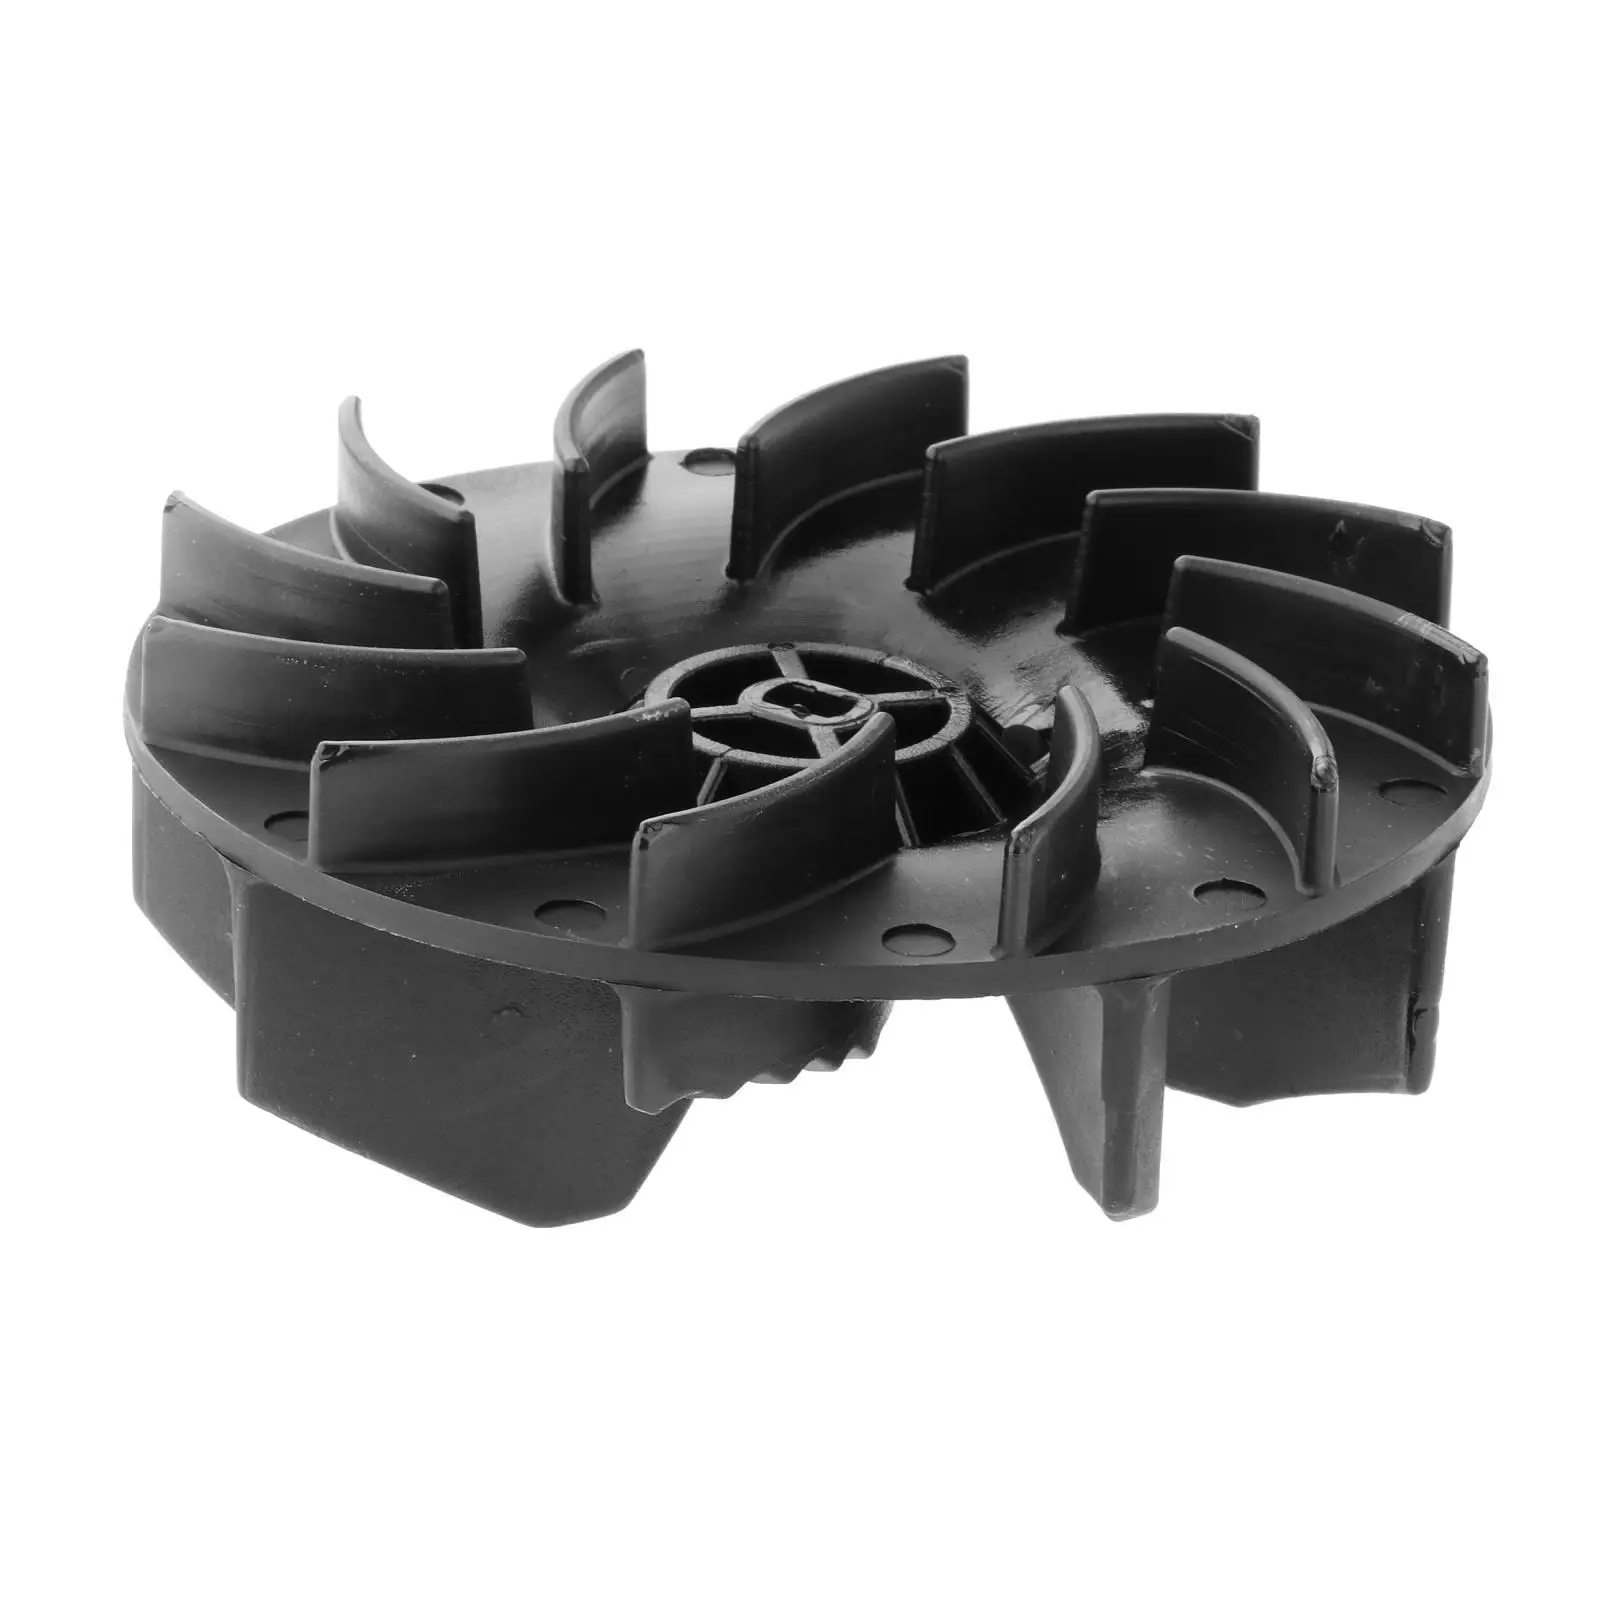 1x Auto Part Accessories Replace for Electric Blower VAC Impeller Fan